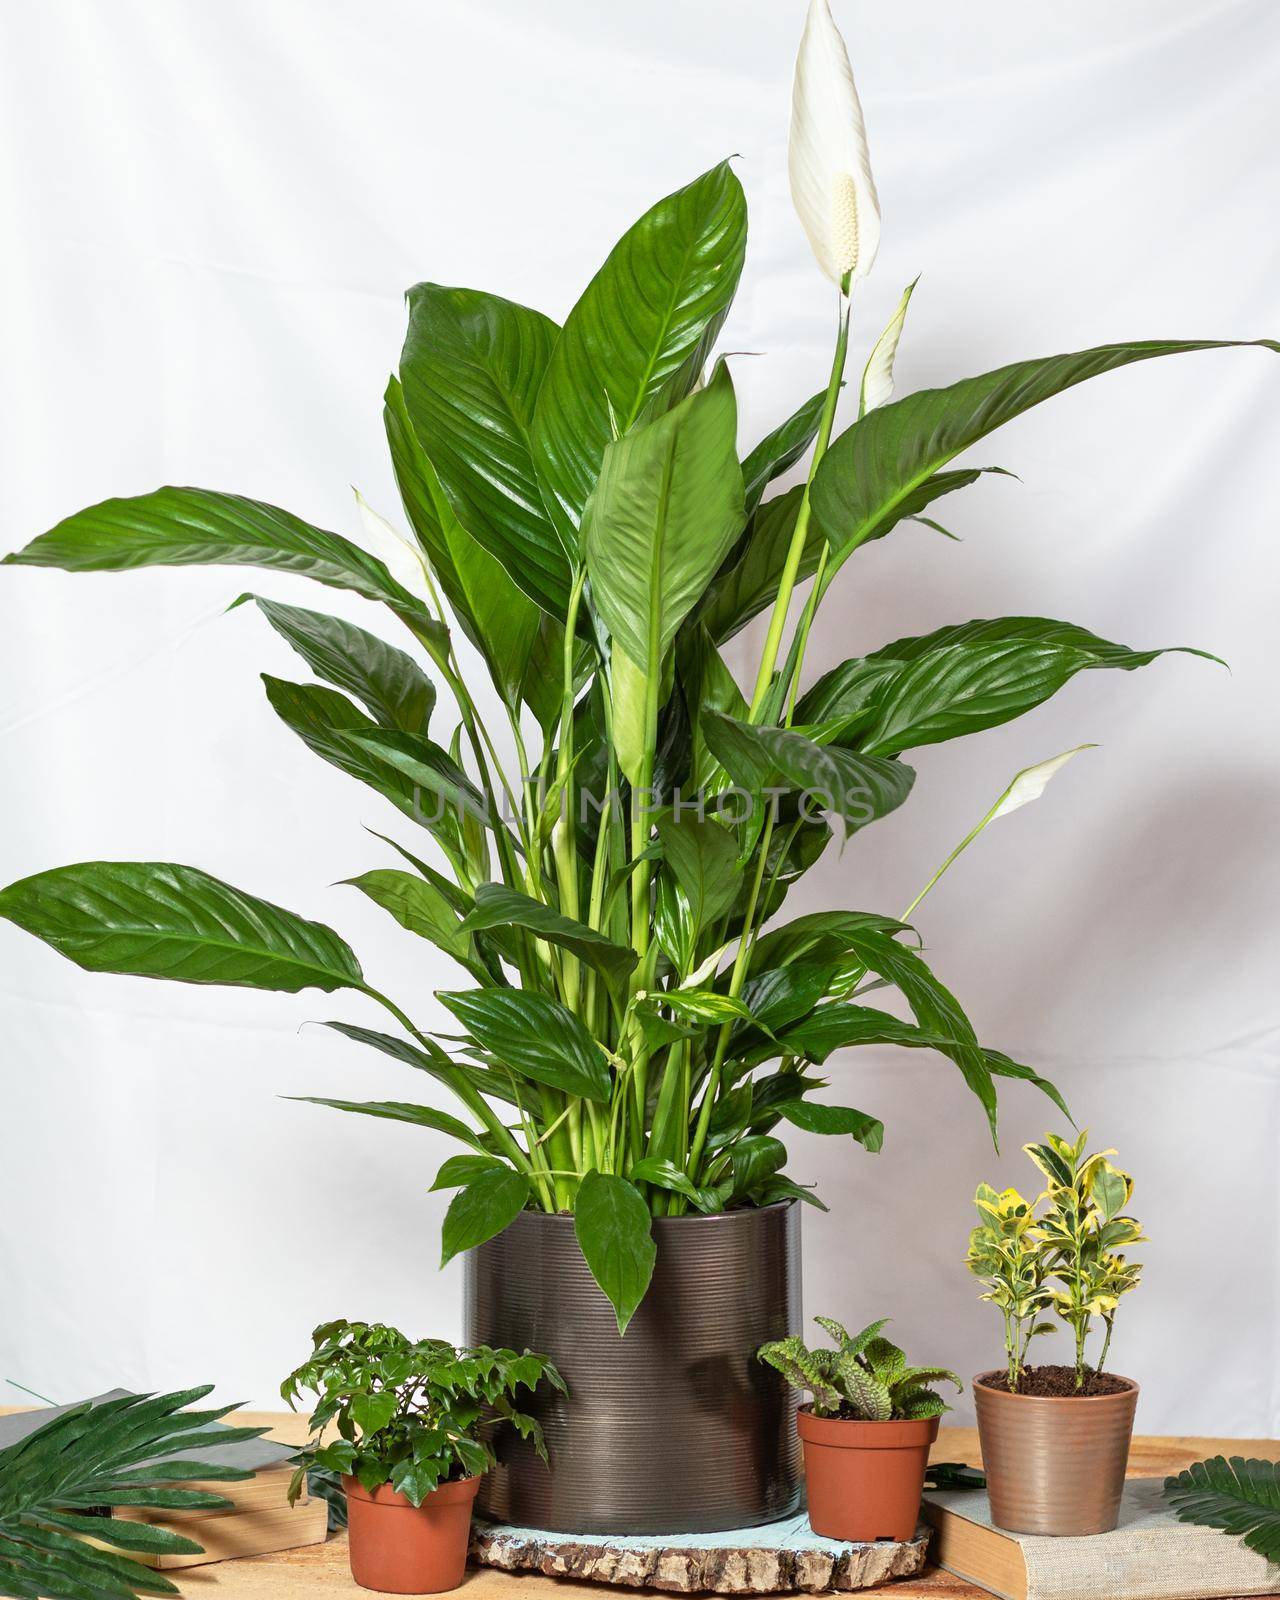 Peace lily, Spathiphyllum, Women's happiness with succulents by ferhad